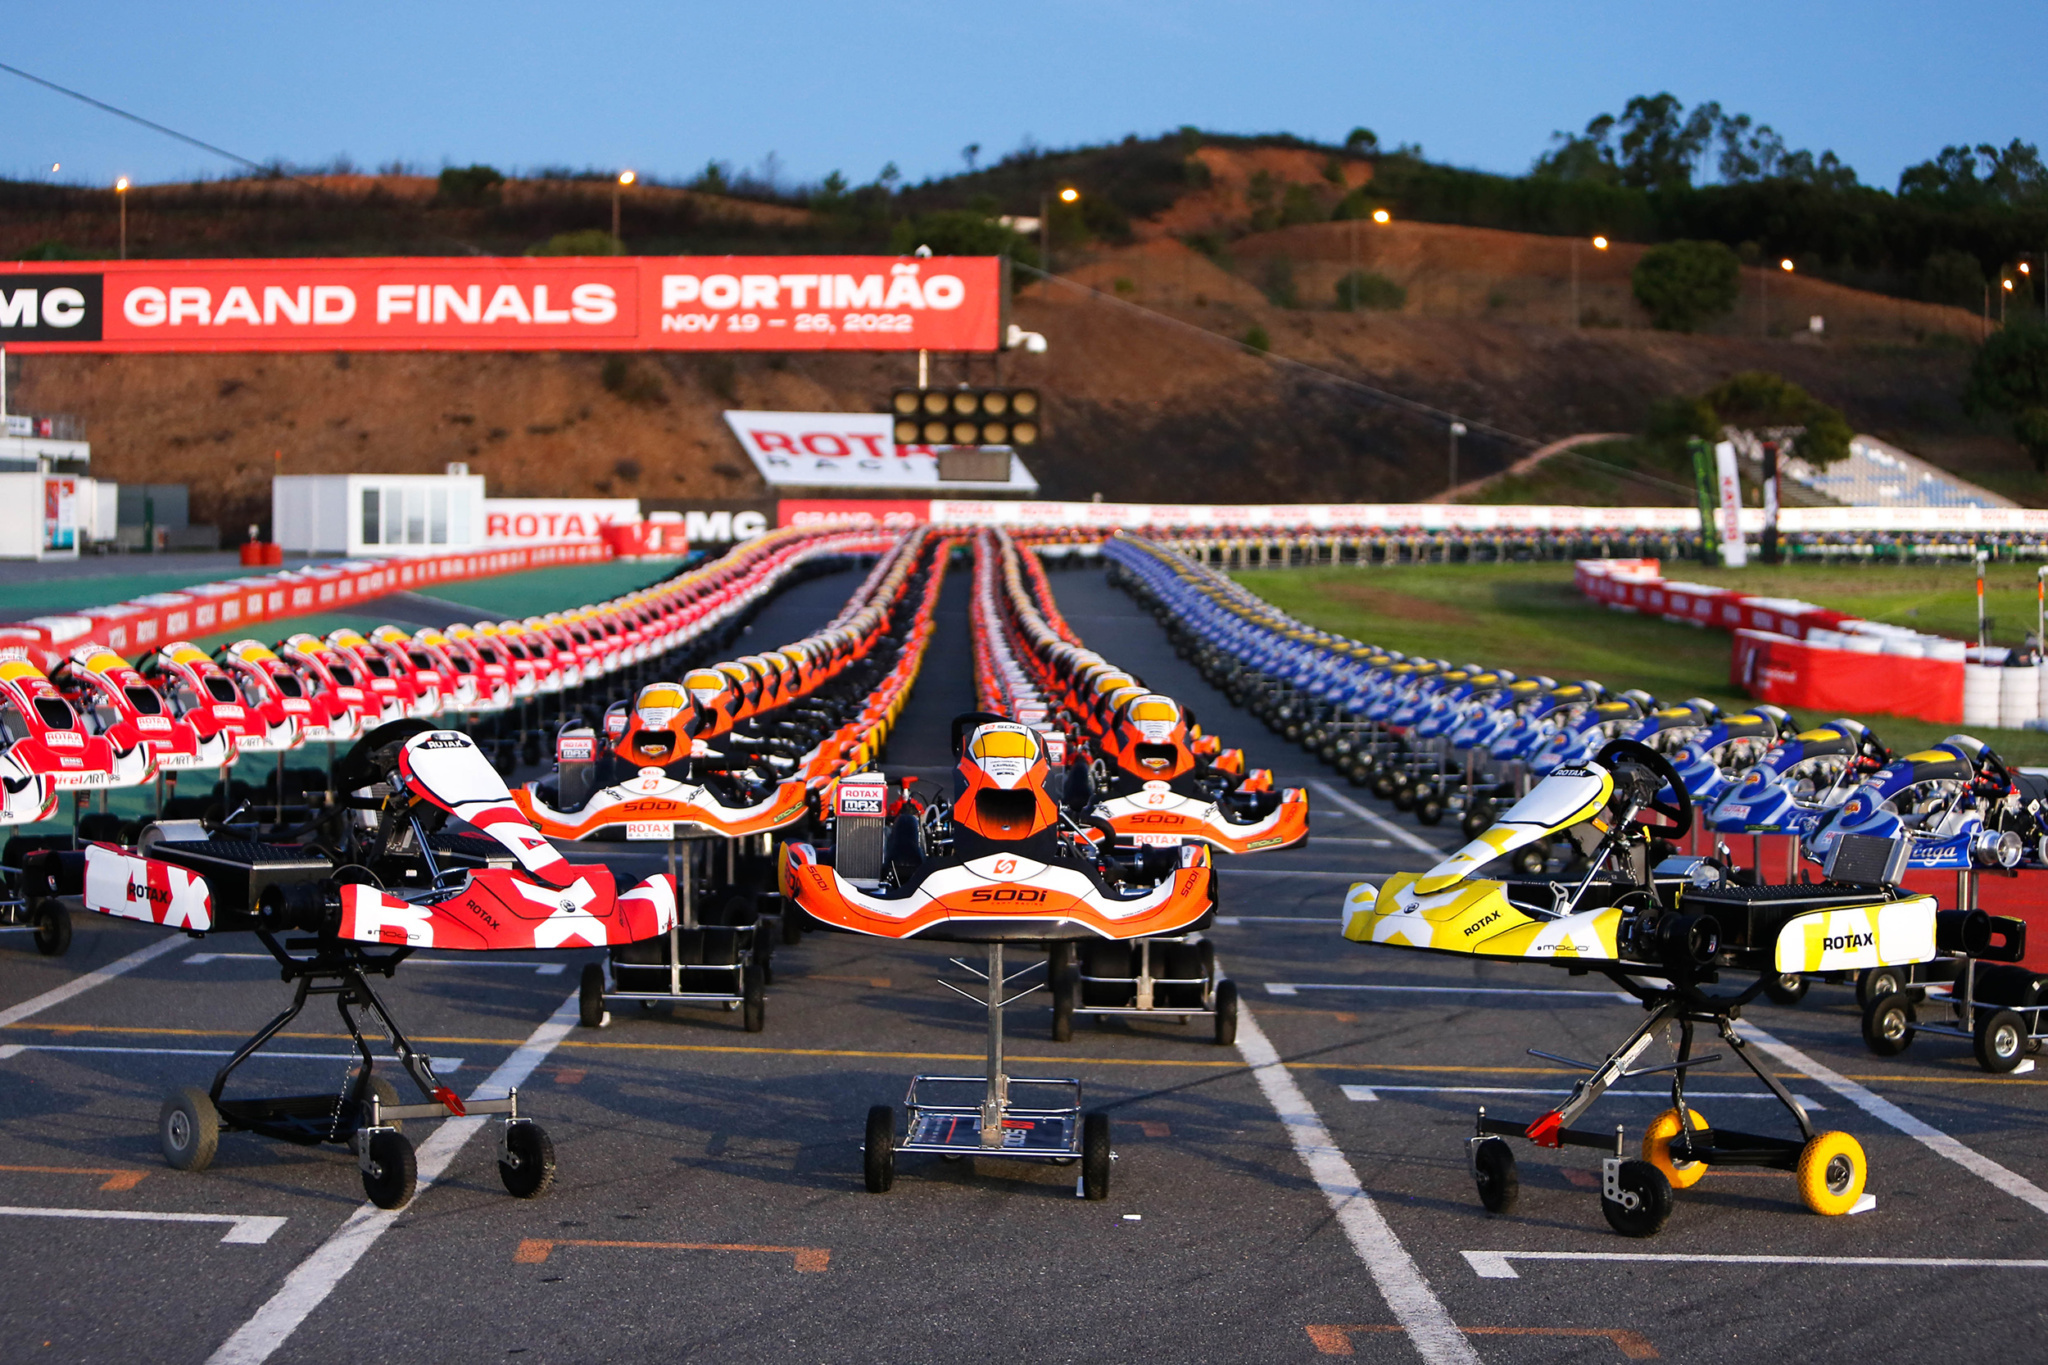 The biggest kart line up ever in the history of the RMCGF